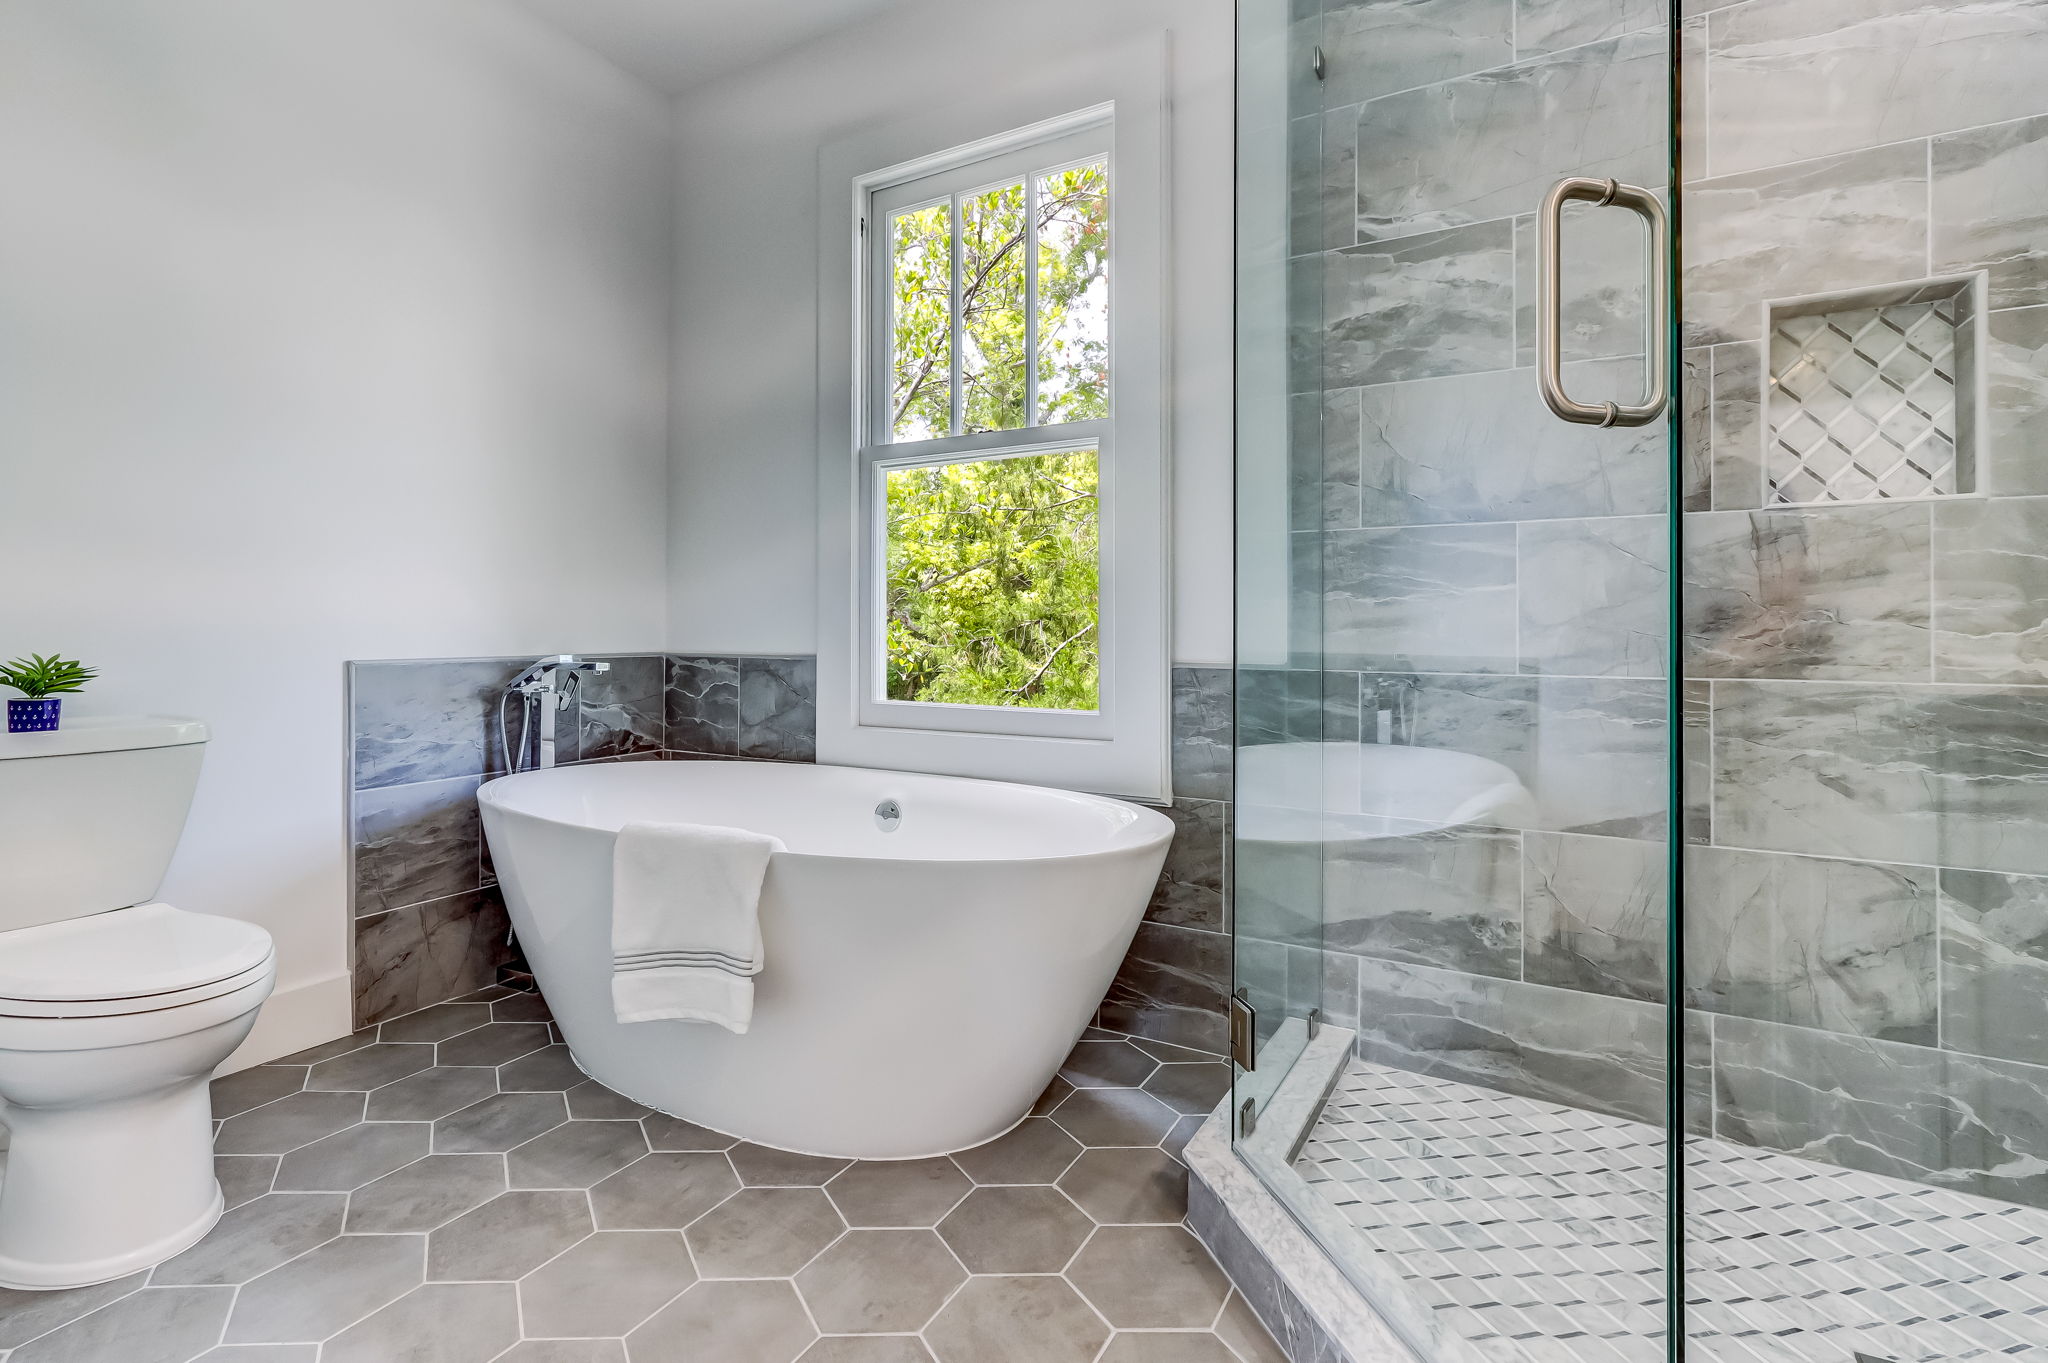 Another highlight of master bath: a beautiful soaking tub